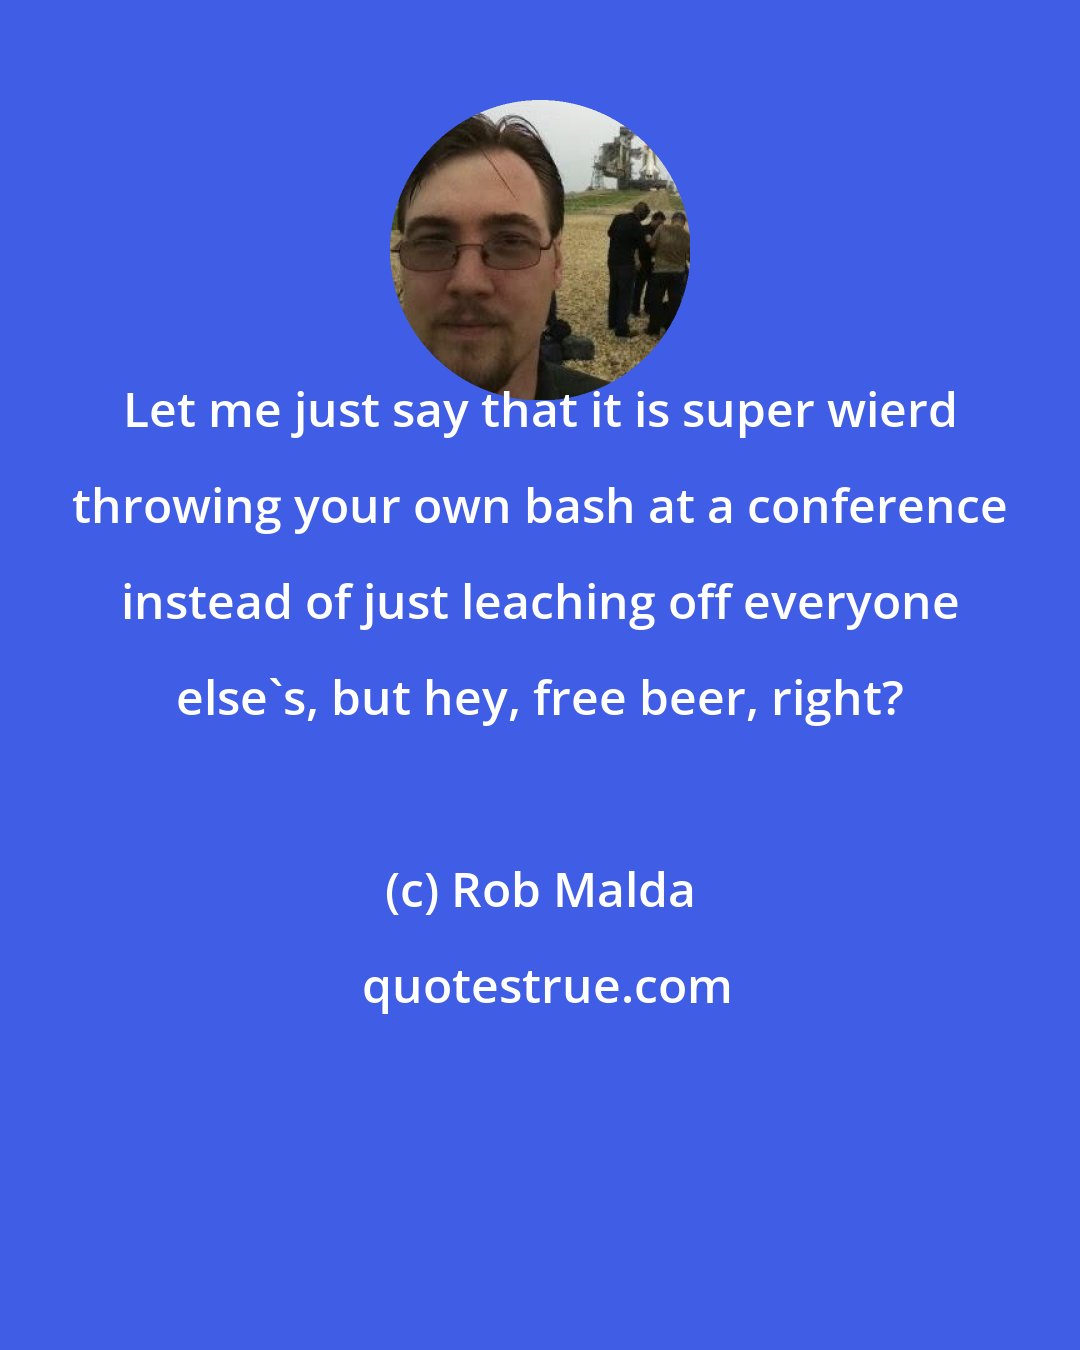 Rob Malda: Let me just say that it is super wierd throwing your own bash at a conference instead of just leaching off everyone else's, but hey, free beer, right?